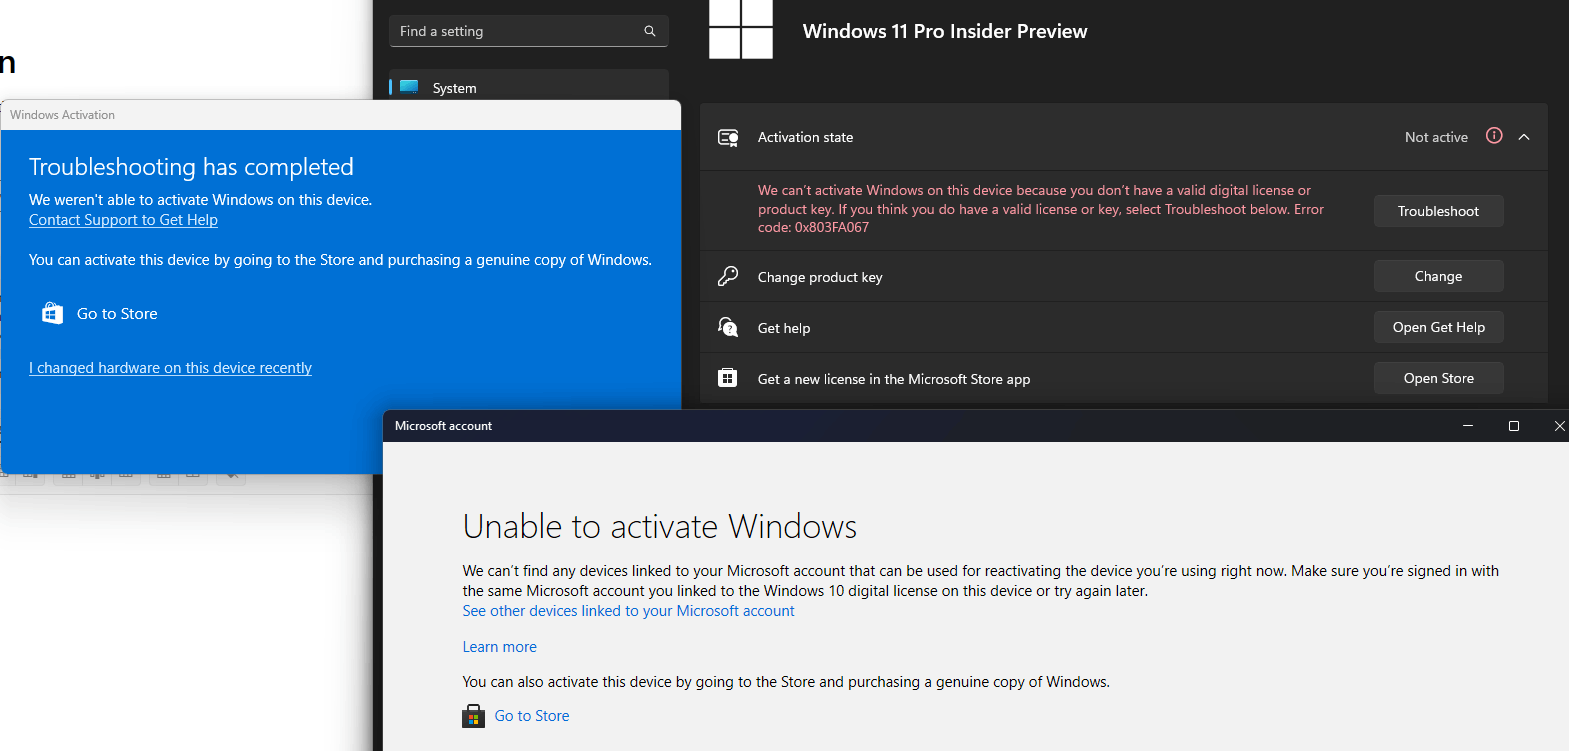 Activate Windows - Microsoft Support